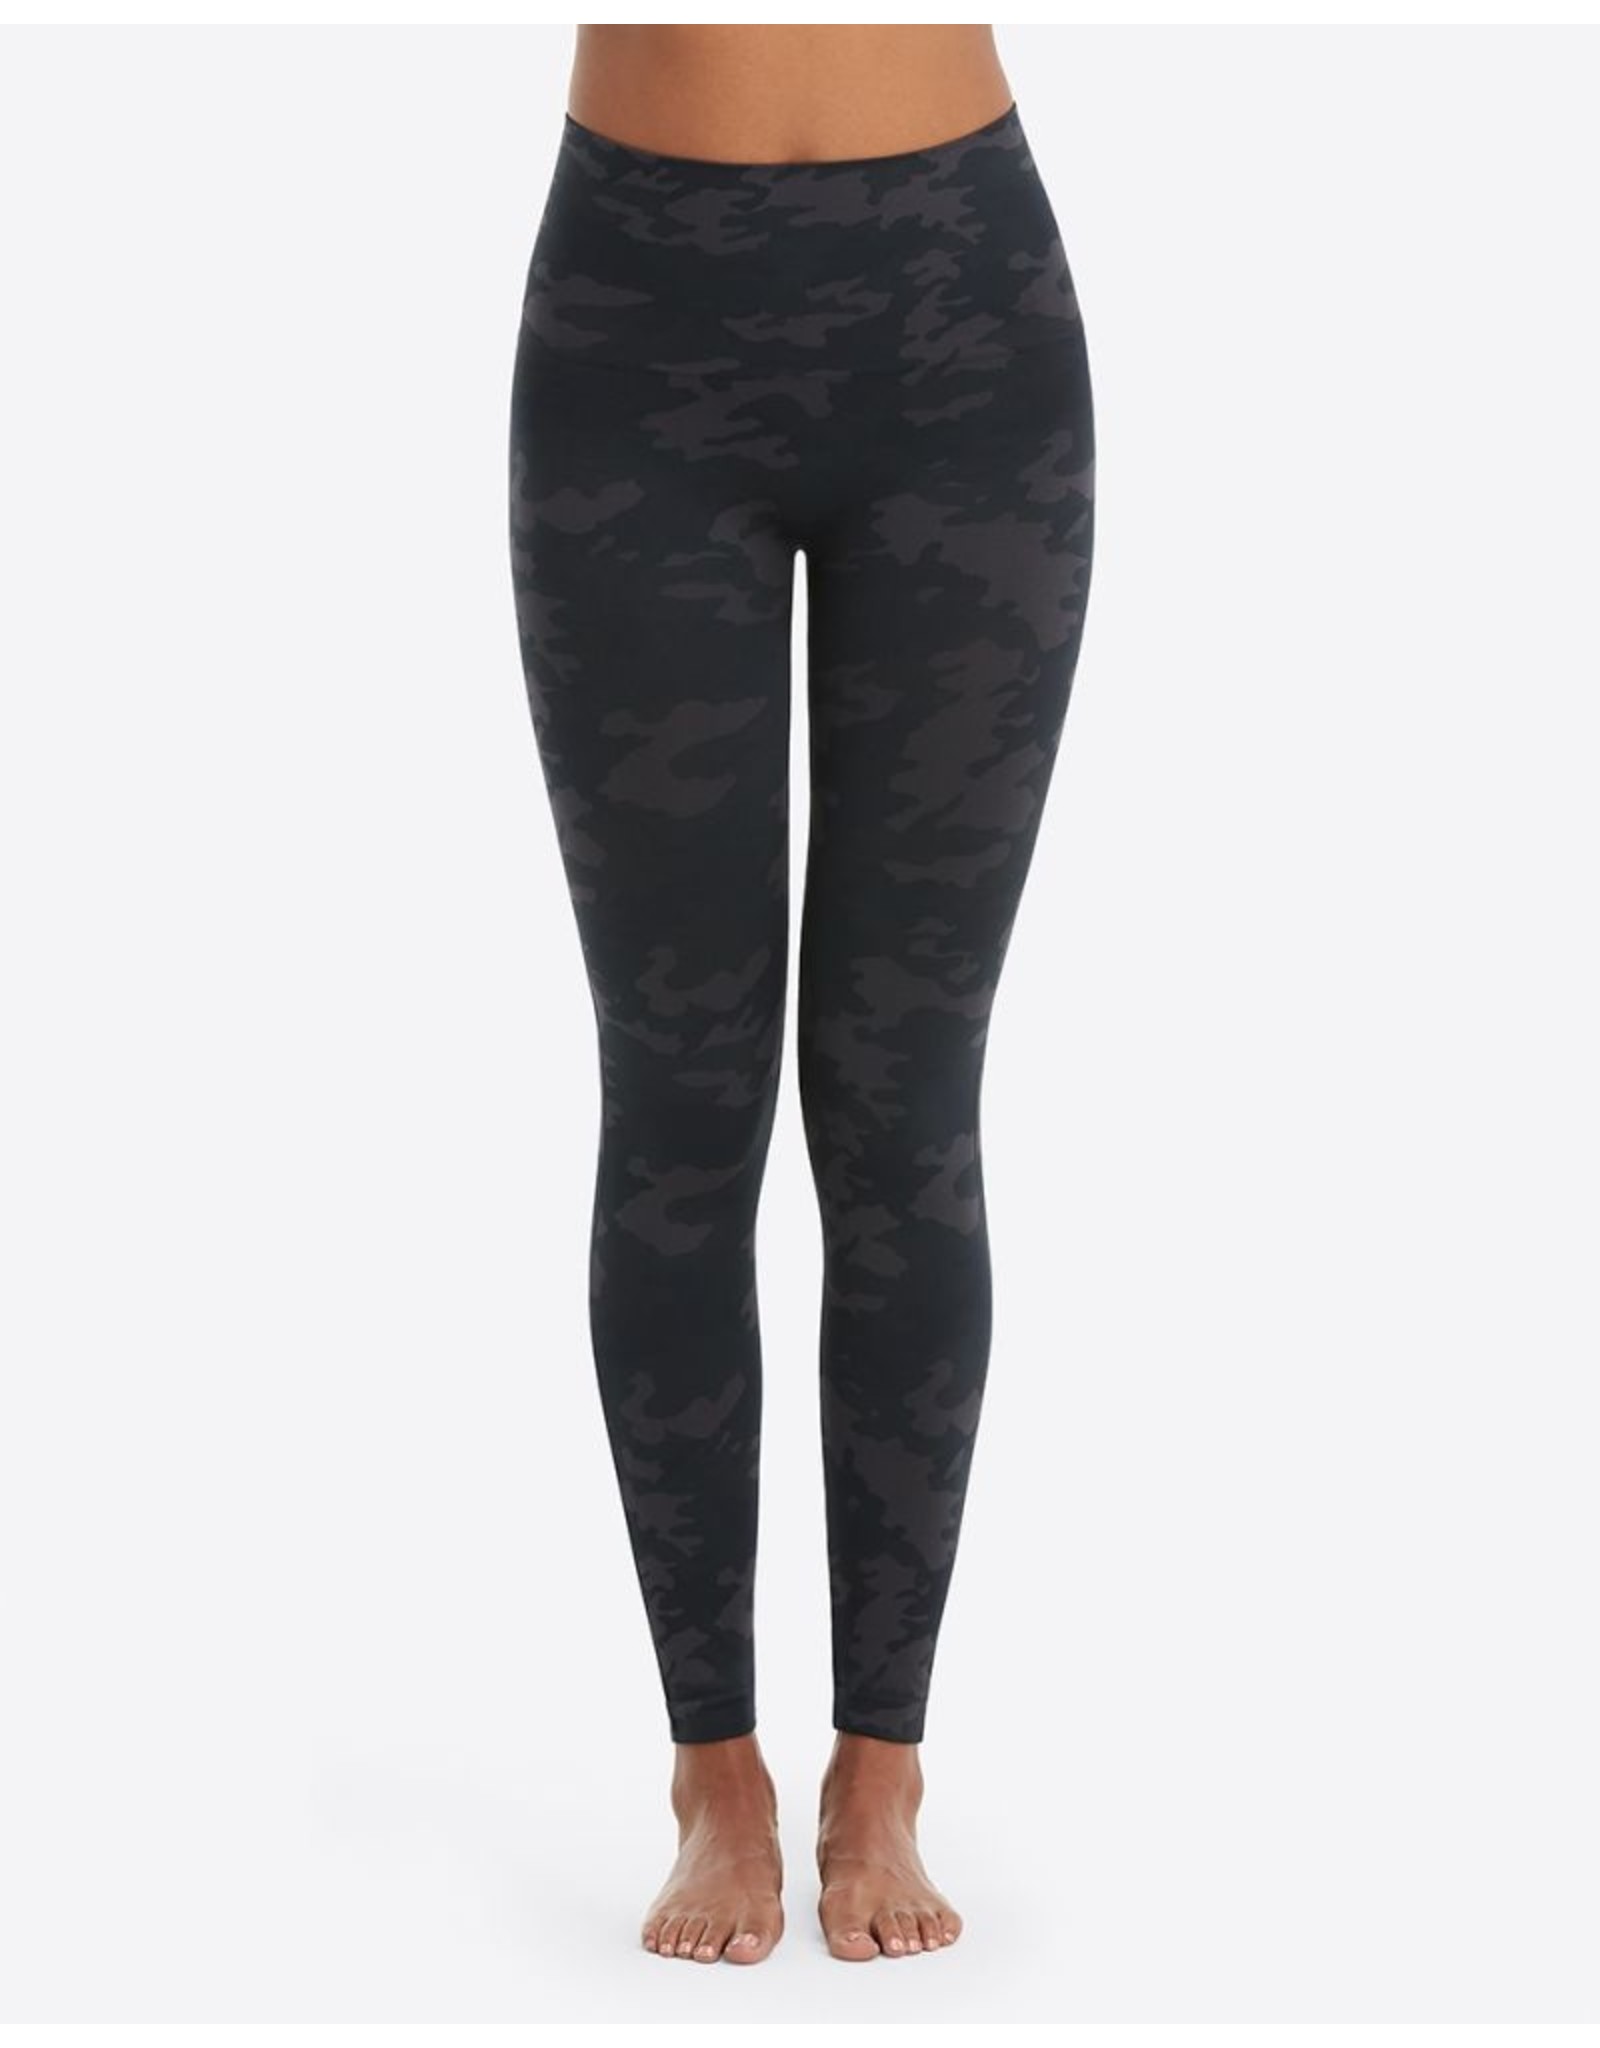 Spanx NWT Look at Me Now Black Camo Leggings Size XL - $50 New With Tags -  From Camille